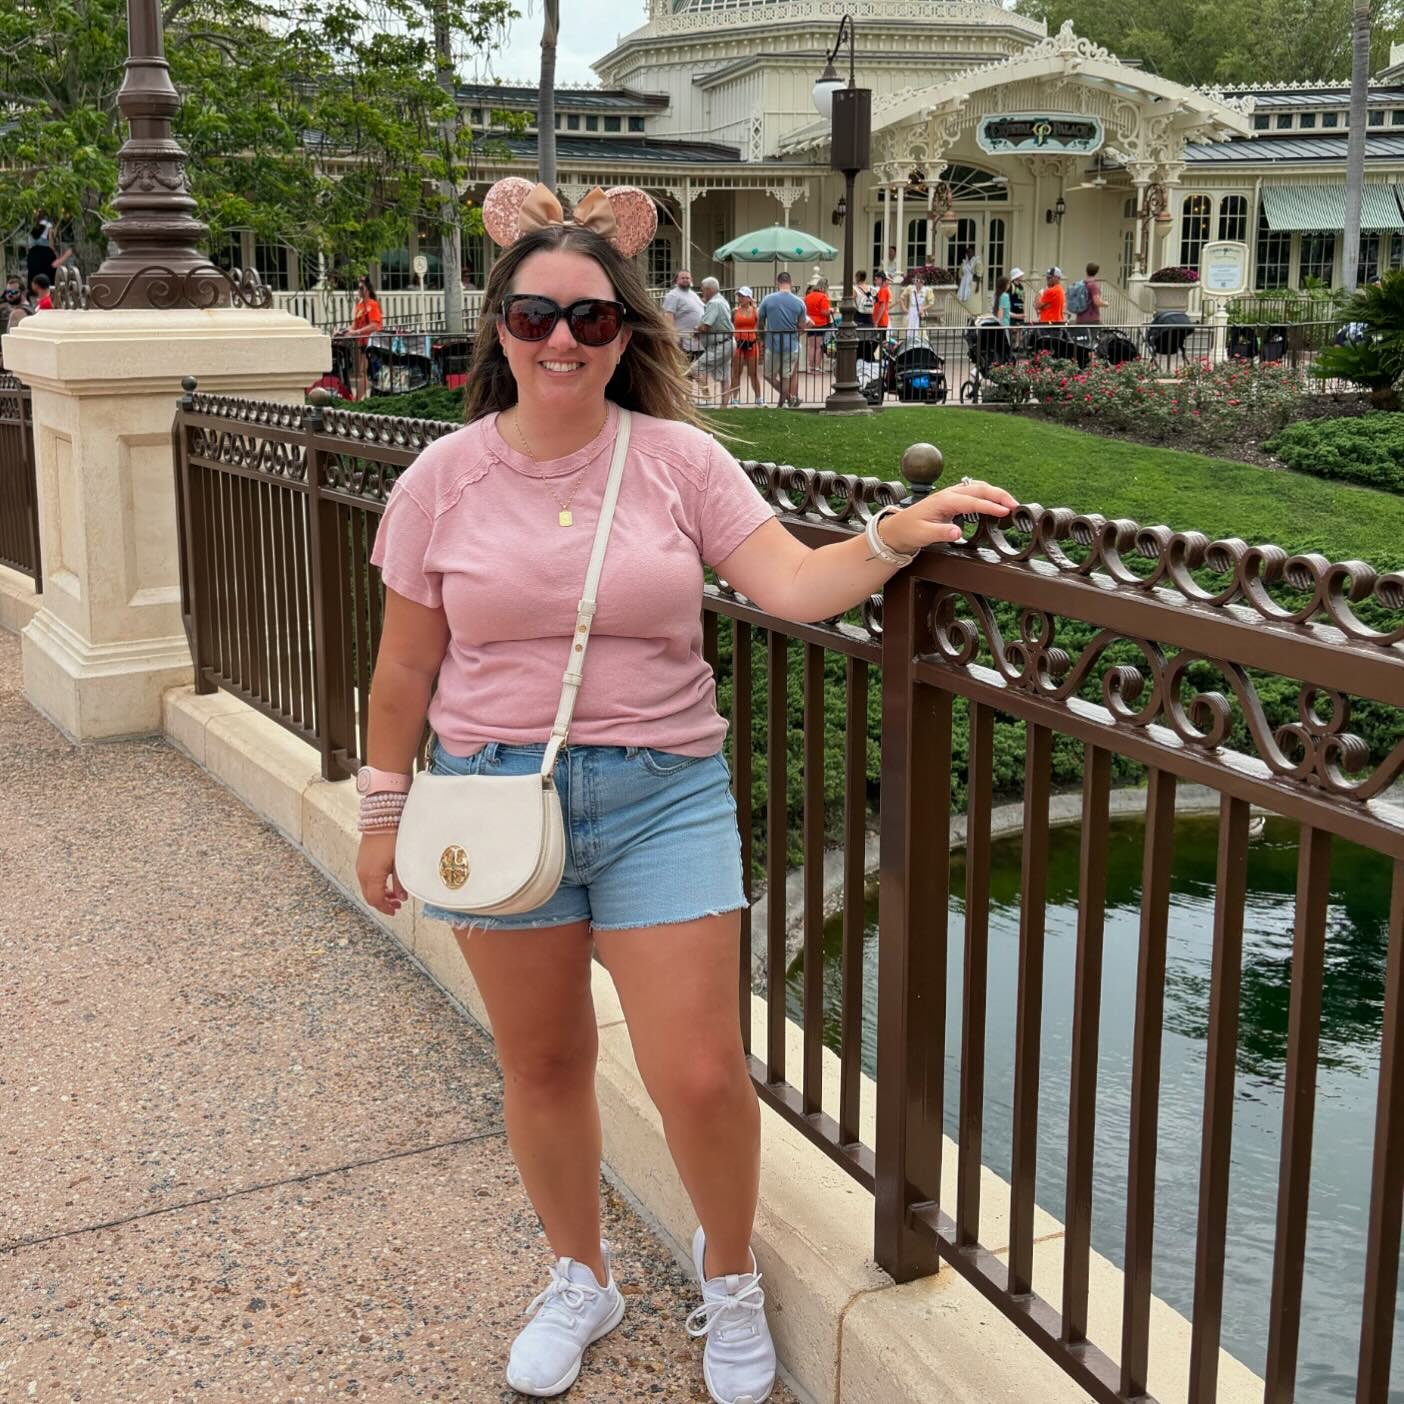 We&rsquo;re already planning our next Disney trip and I think I&rsquo;m as excited as the kids are! 🐭

While we plan I&rsquo;m blogging all our days so far and sharing all our Disney finds on LTK too! If you are planning a trip too, let me know and 